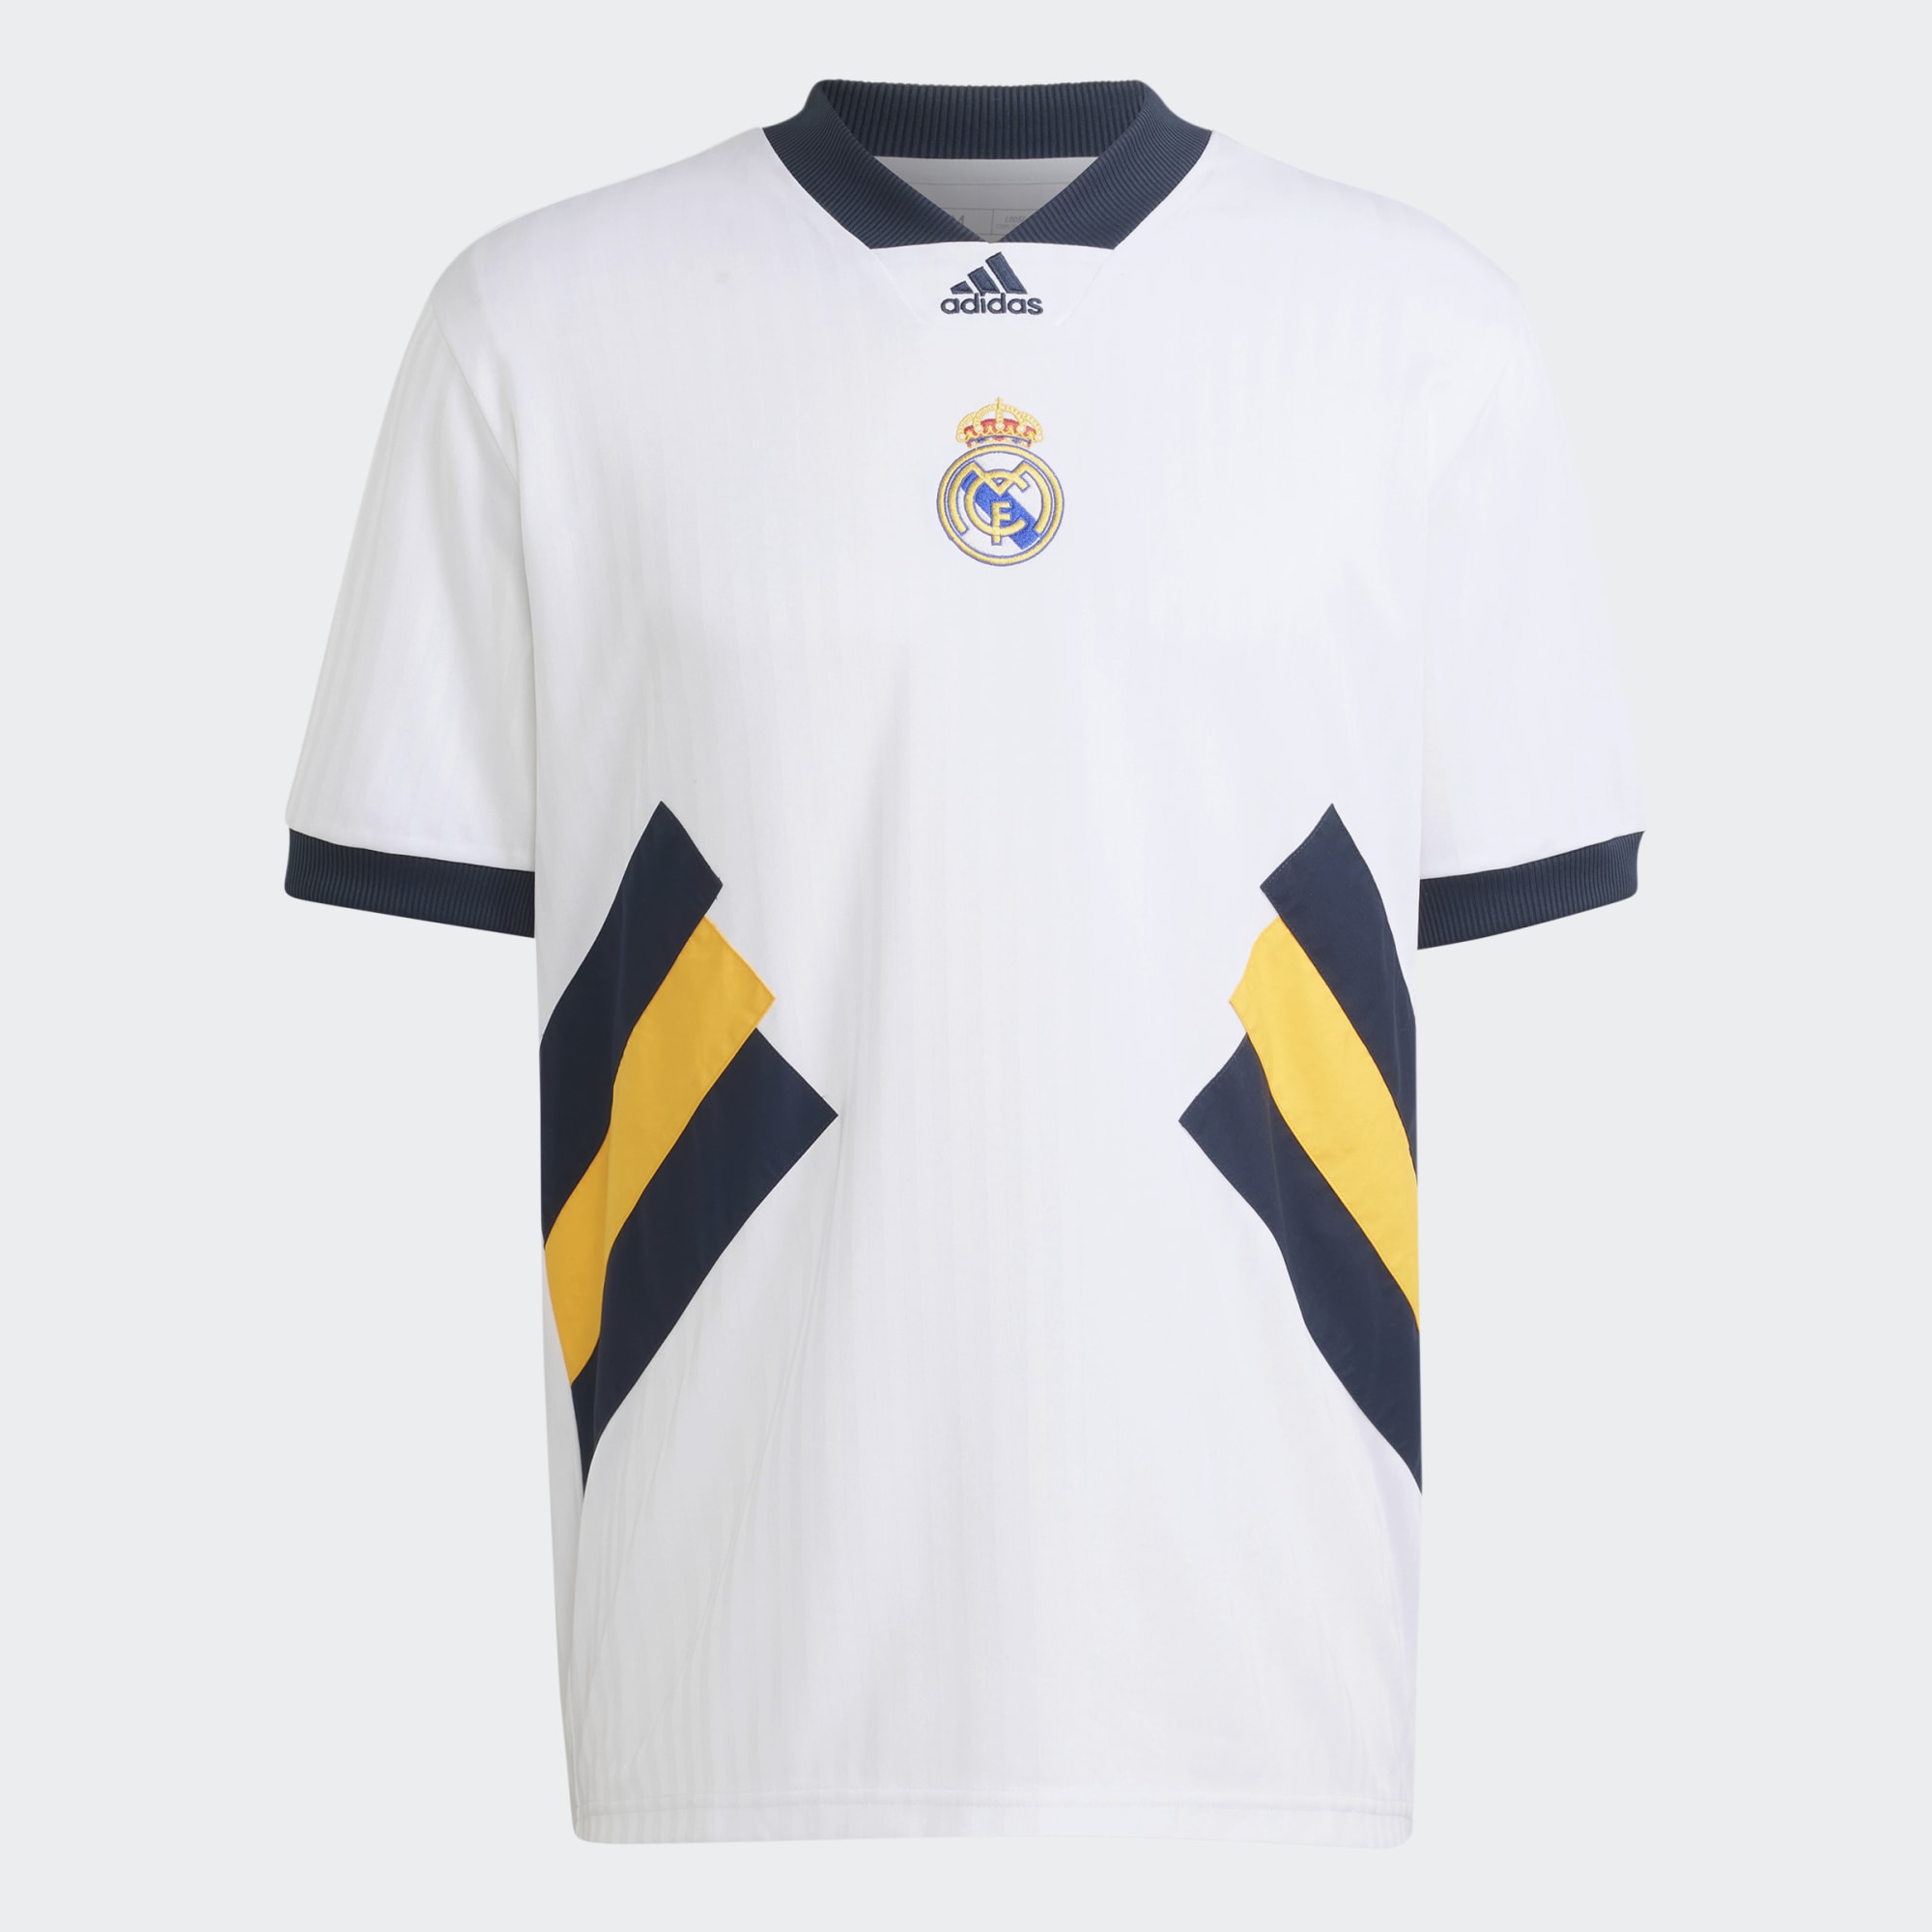 Concentratie bestrating beest stefanssoccer.com:adidas Real Madrid Icon Jersey - White